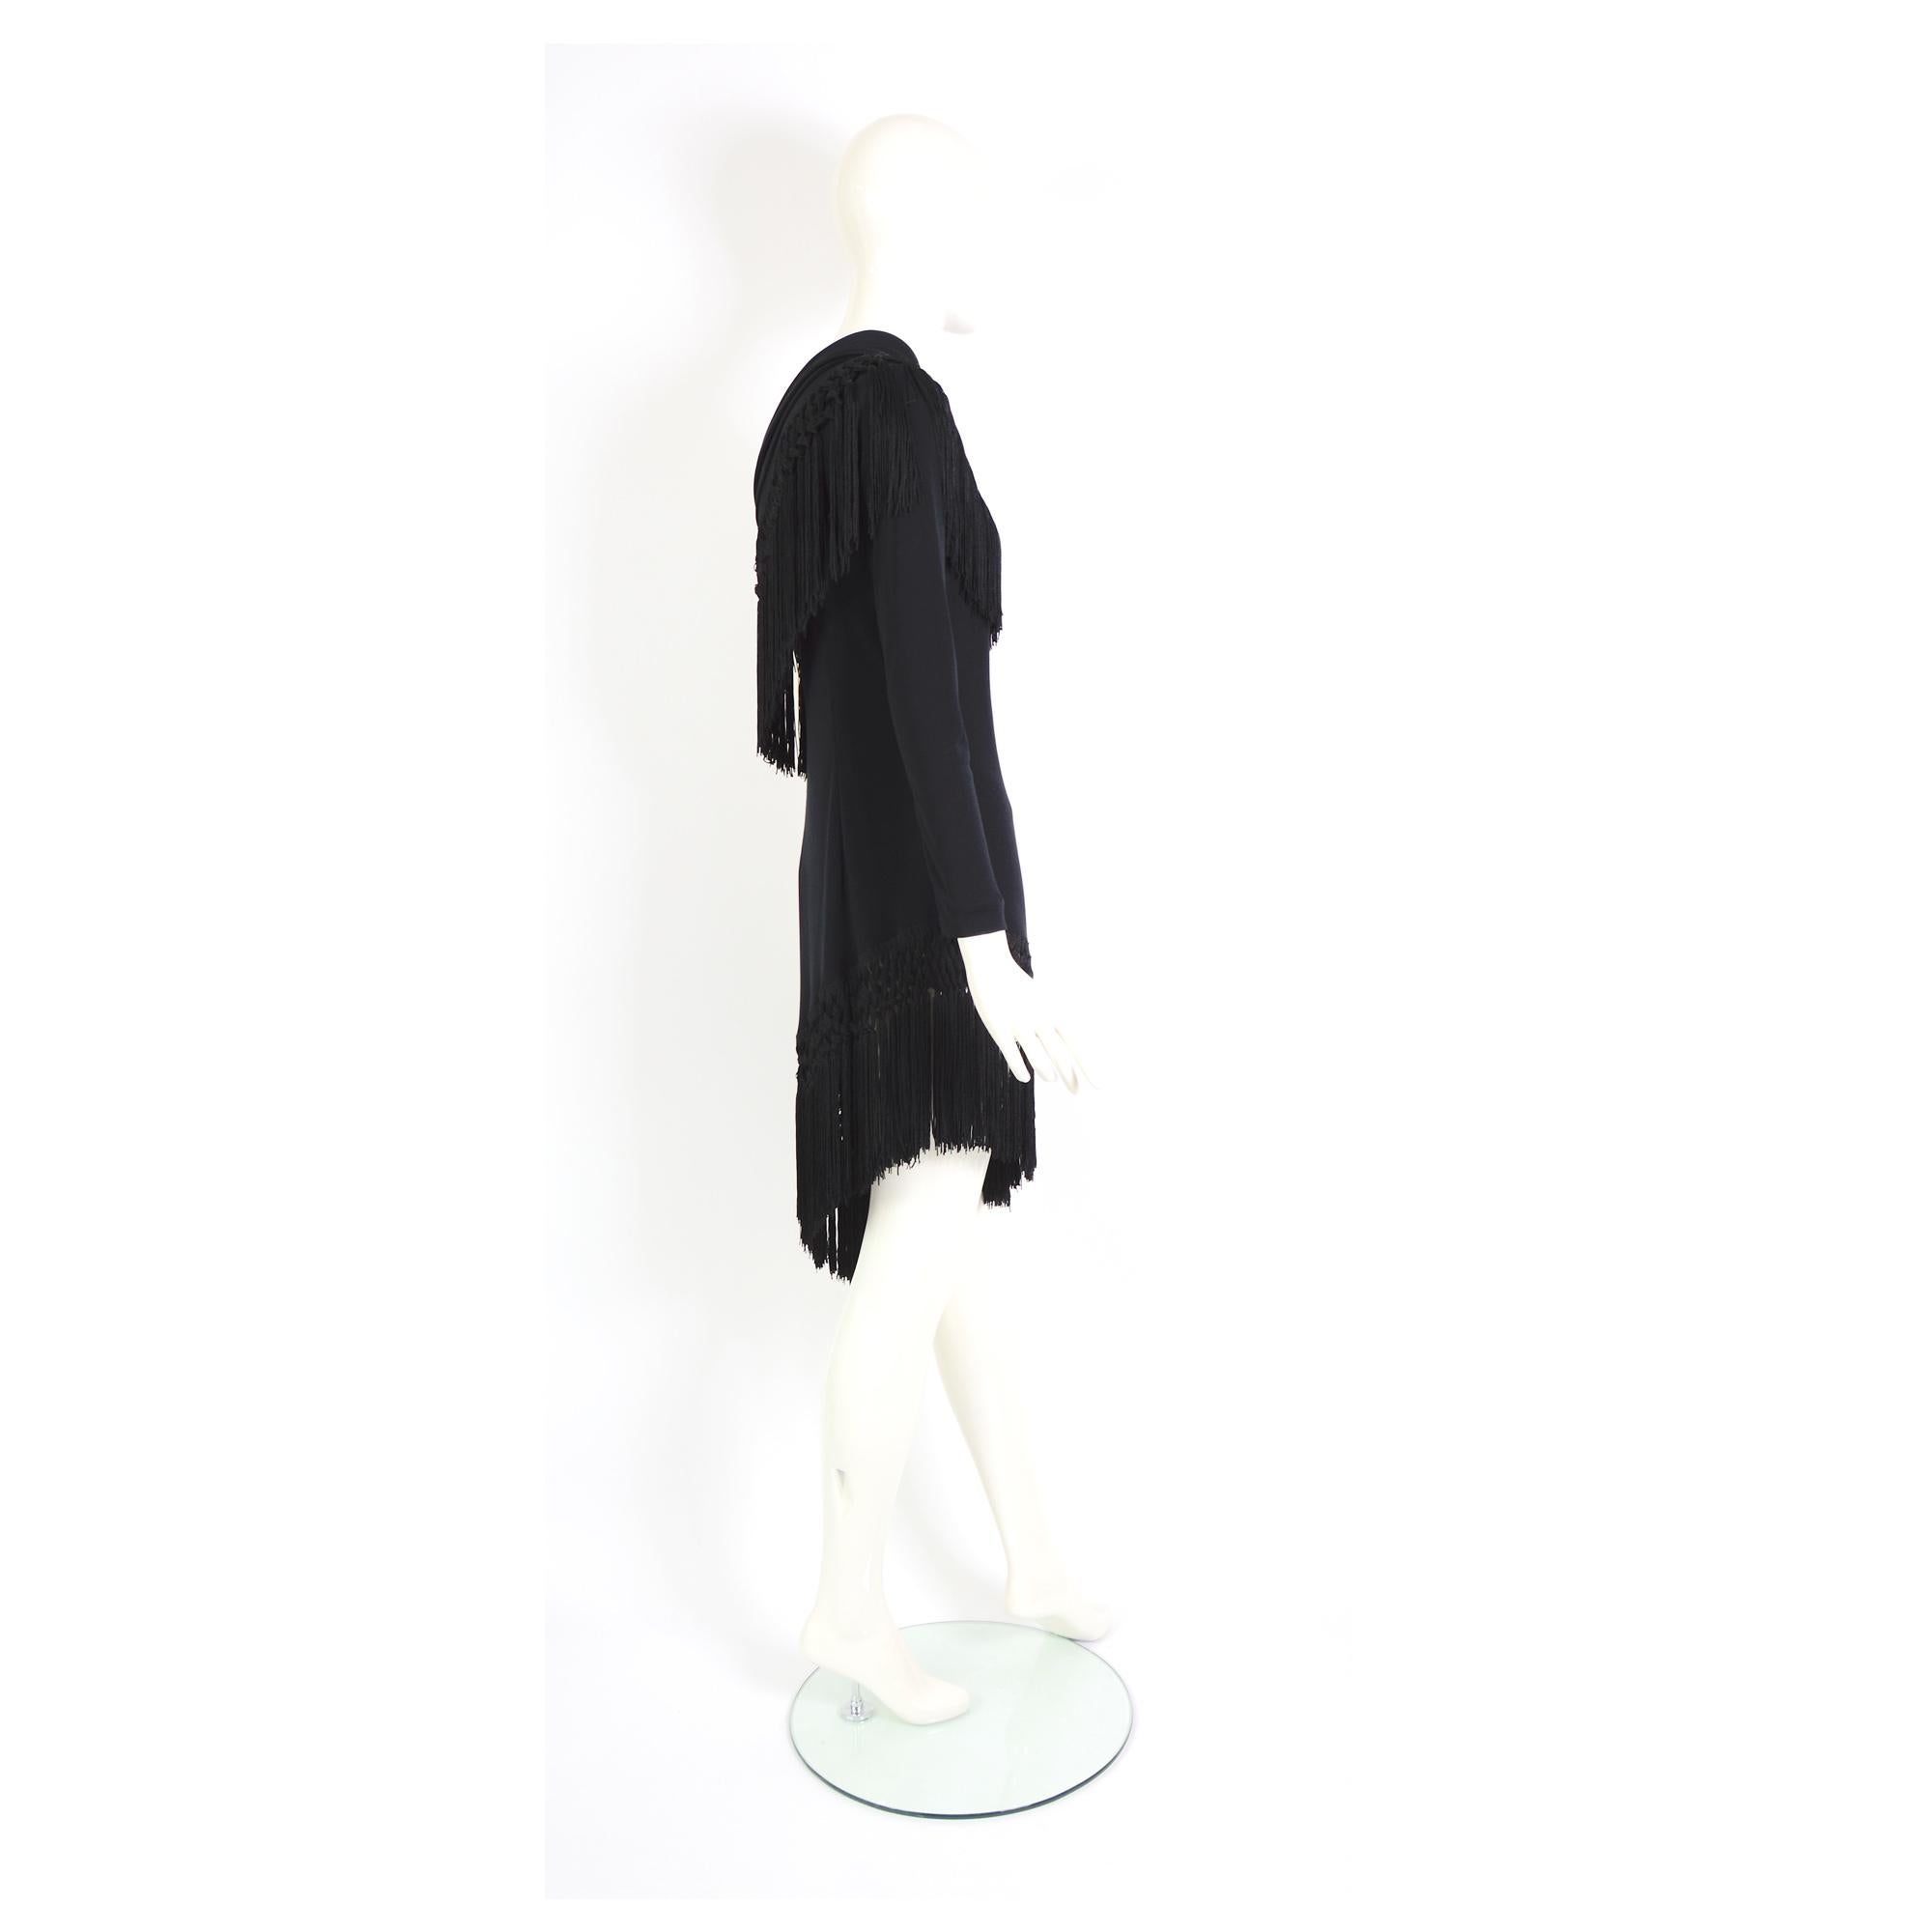 Dolce & Gabbana spring summer 2015 one sleeve black jersey & tassel  dress  In Excellent Condition For Sale In Antwerp, BE